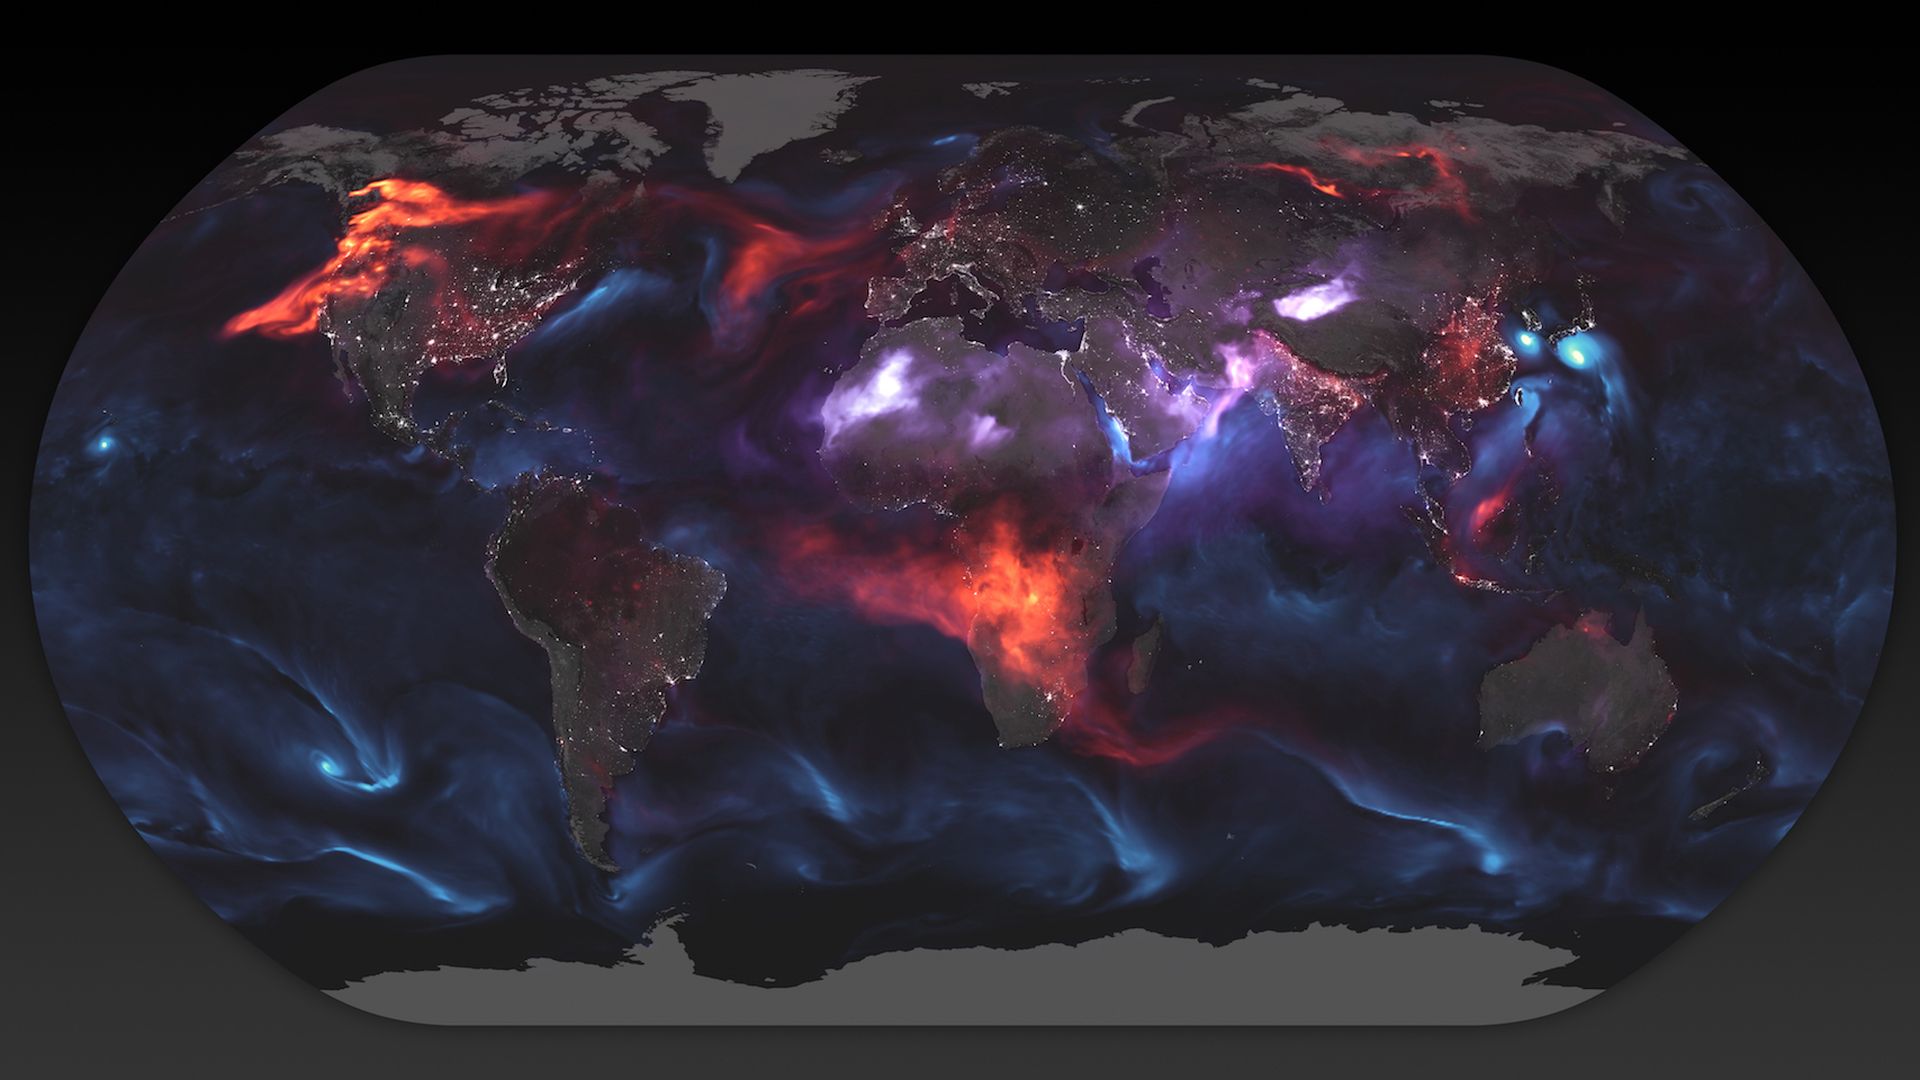 Global visualization of aerosols from wildfires, storm systems and biomass burning, among other sources.